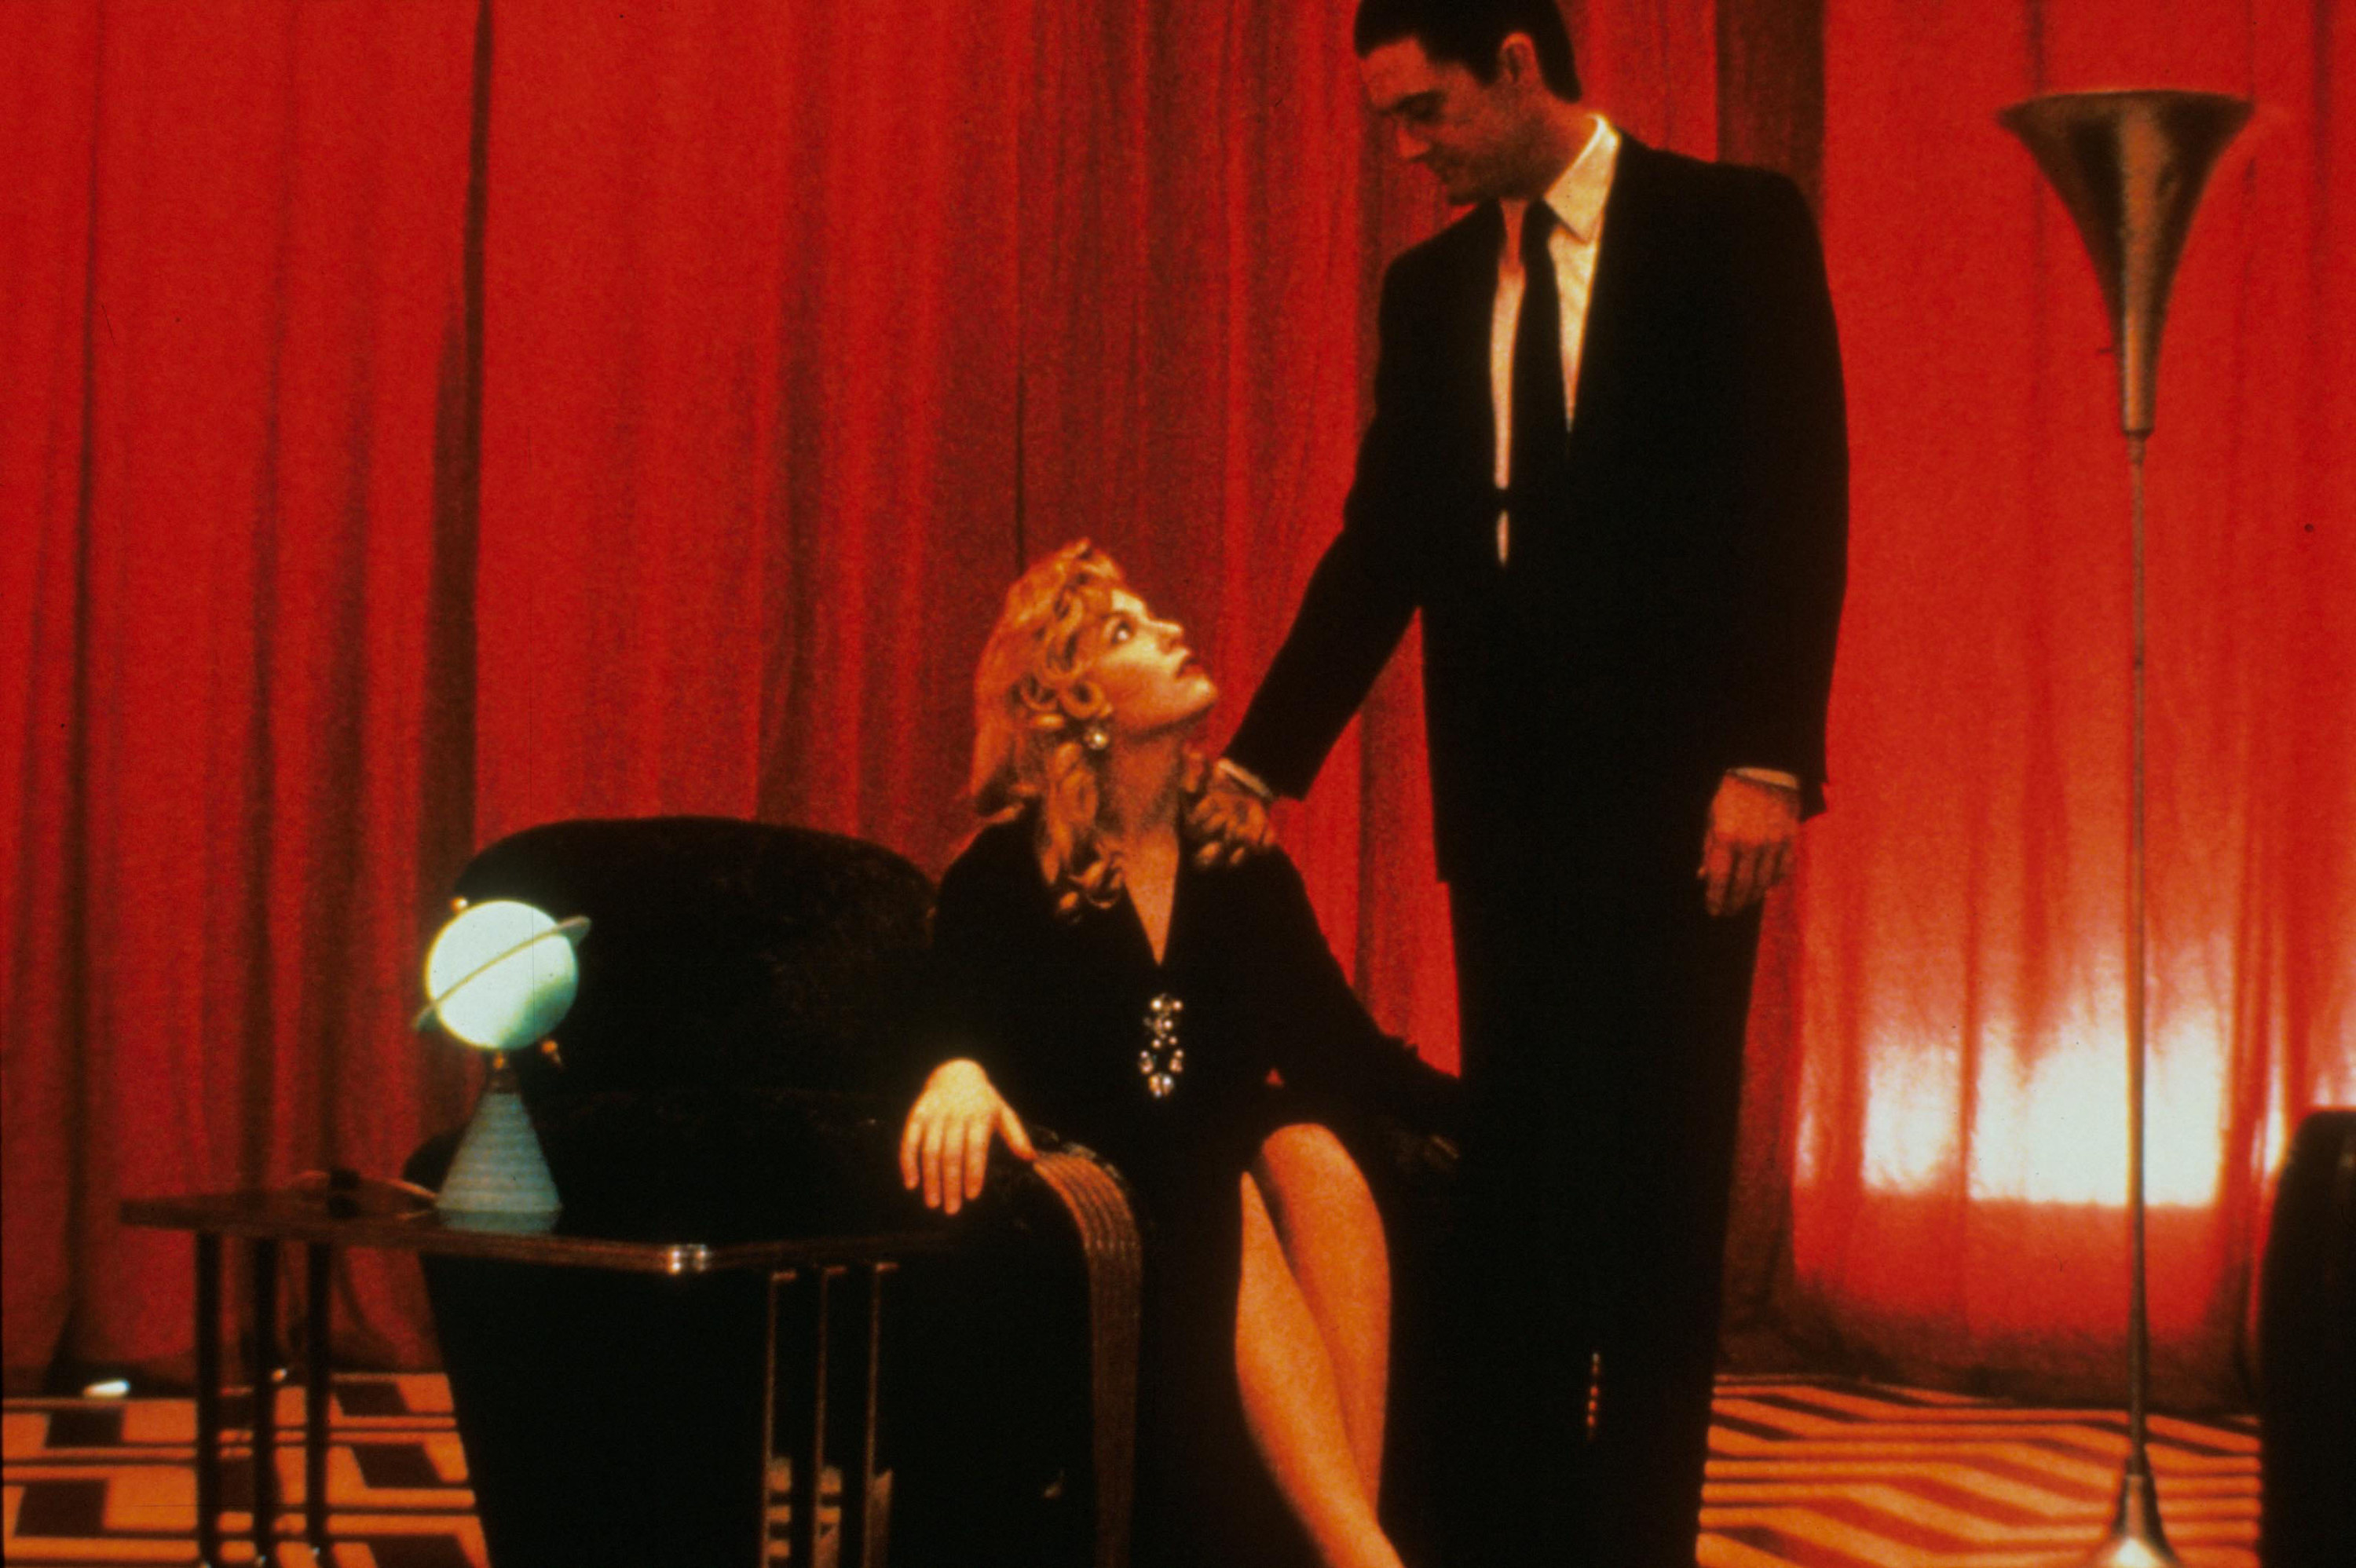 A man in a three-piece suit stands in a red draped room next to a blonde woman on a leather chair